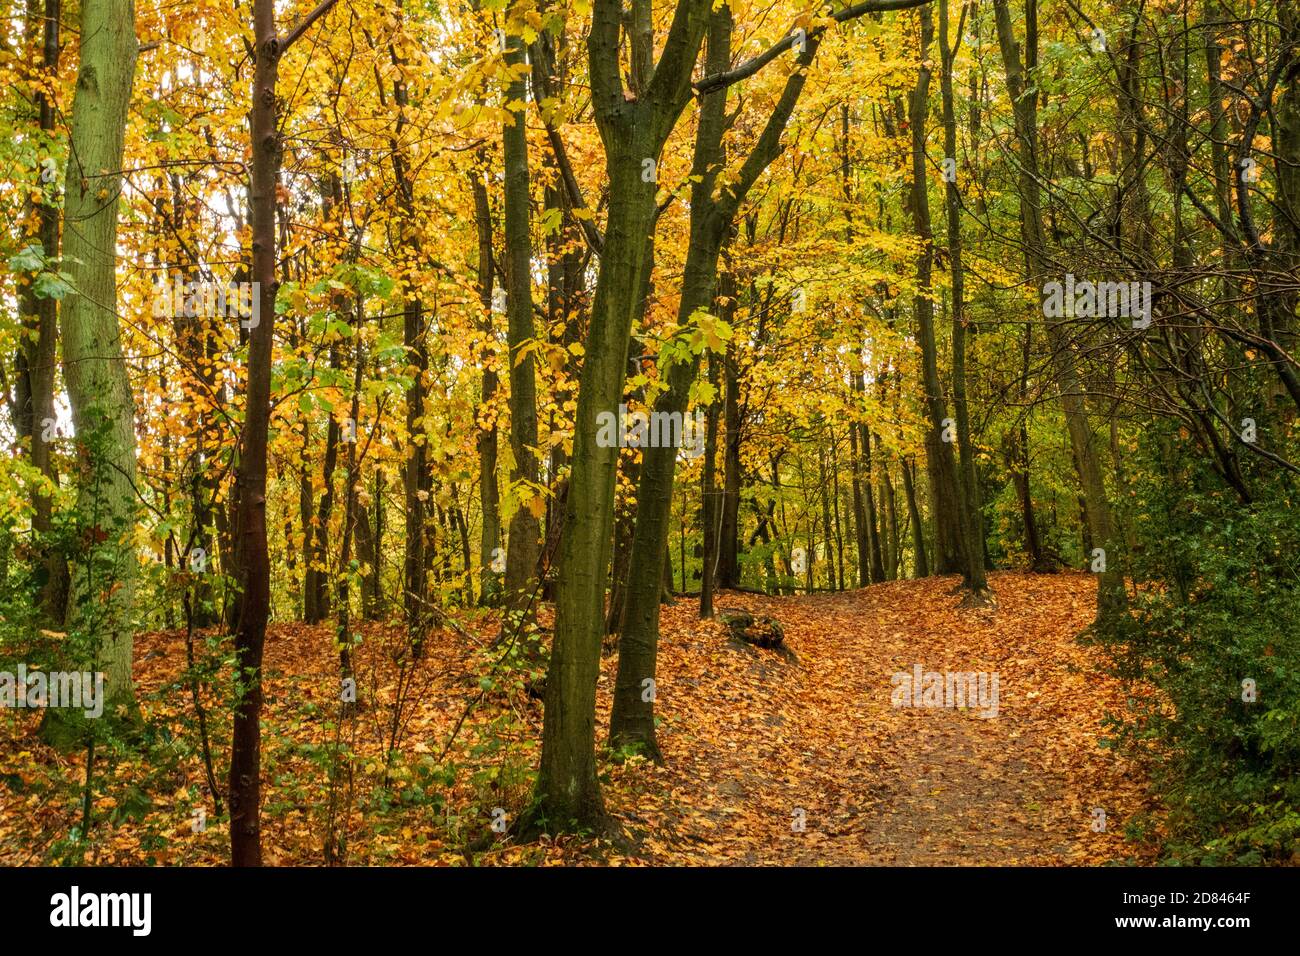 A wet autumnal day in the ancient Gillfield Wood, Totley, on the outskirts of Sheffield, Yorshire., UK Stock Photo